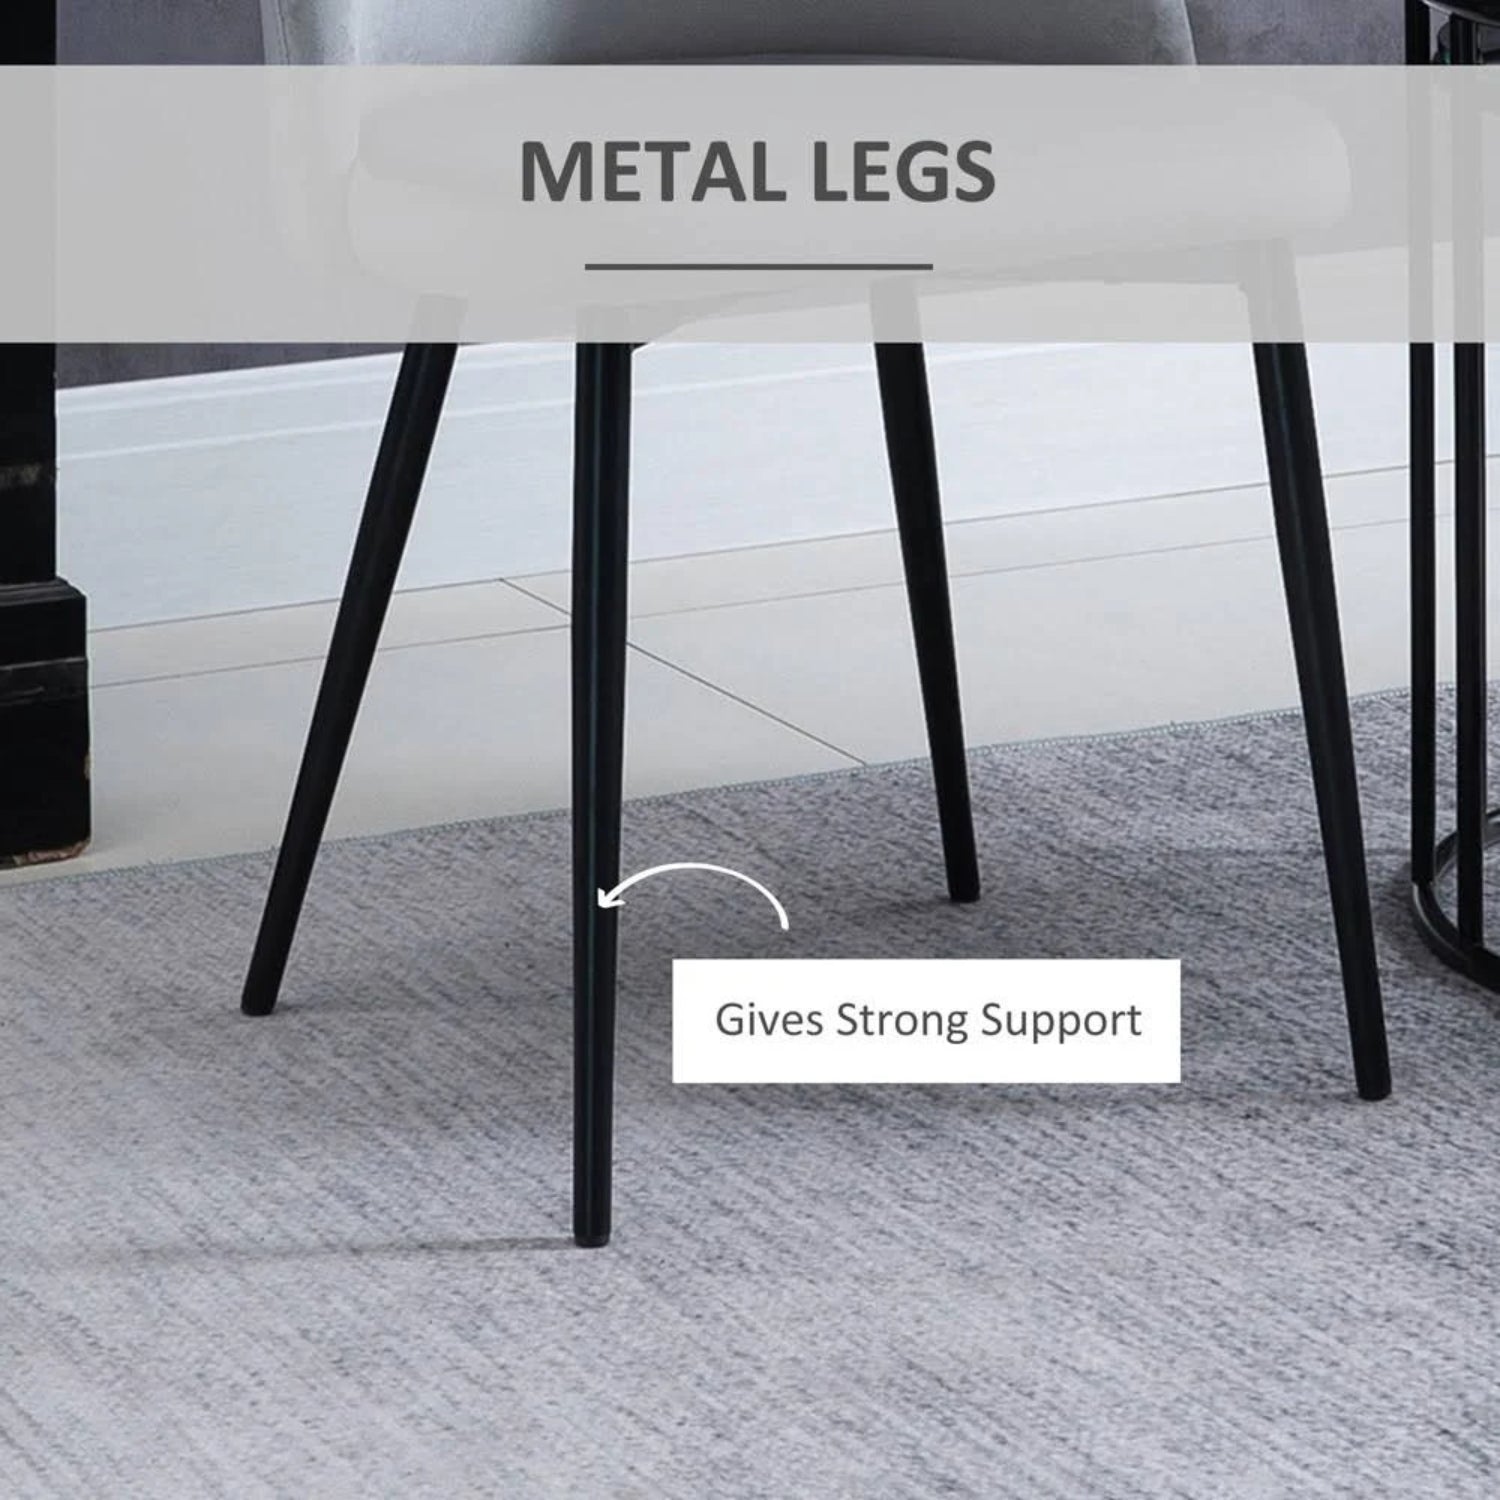 Metal legs provide sturdy support for the black willa arlo dining chair.